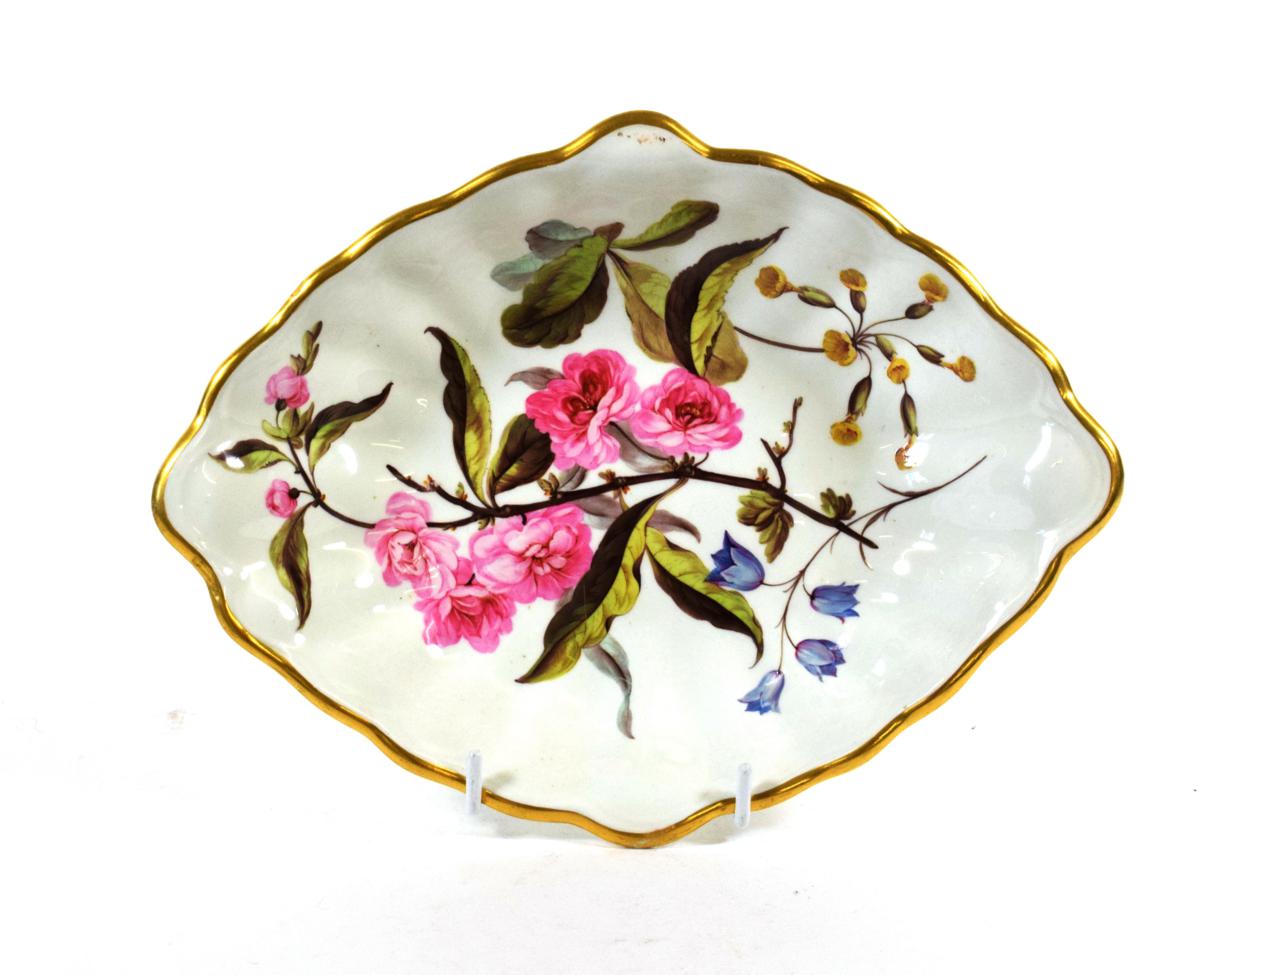 Lot 528 - A Derby Porcelain Fluted Oval Dessert Dish, painted in the manner of William ''Quaker'' Pegg, circa